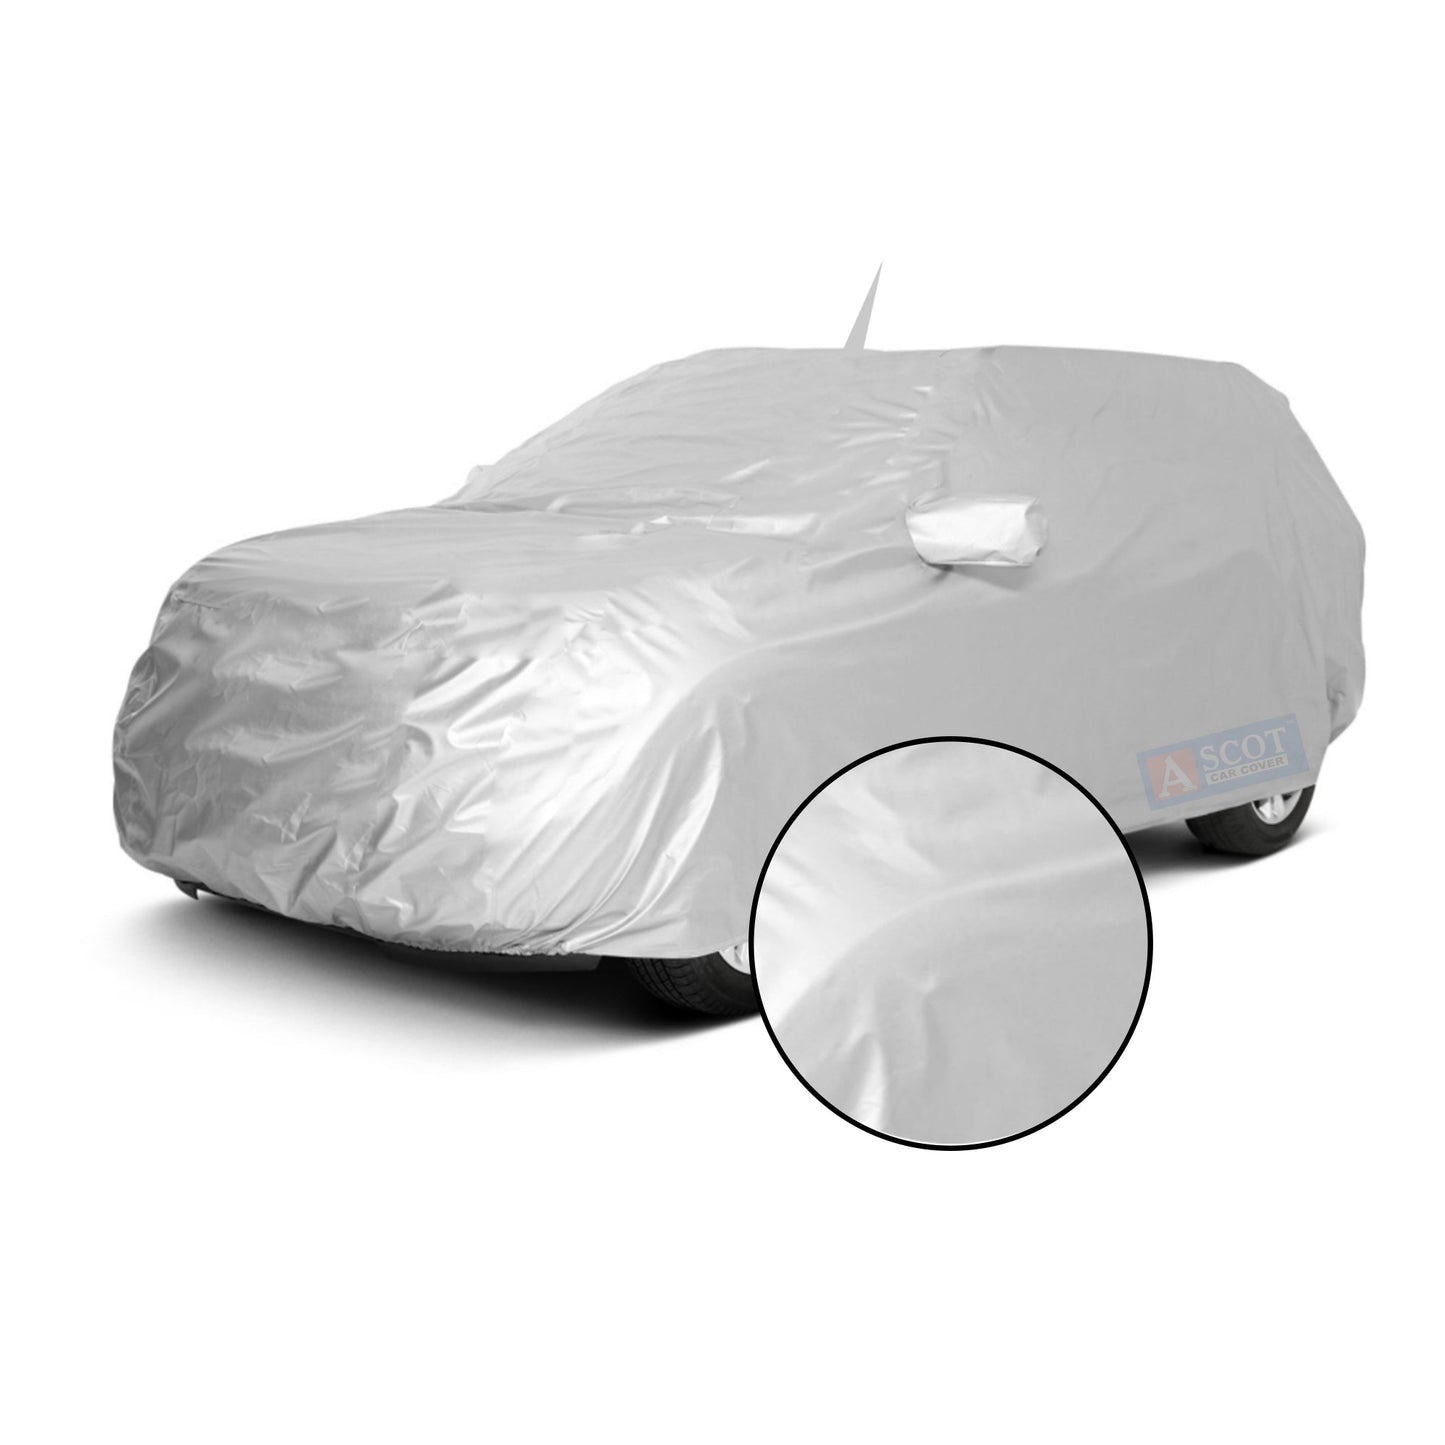 Ascot Tata Tiago Car Body Cover Dust Proof, Trippel Stitched